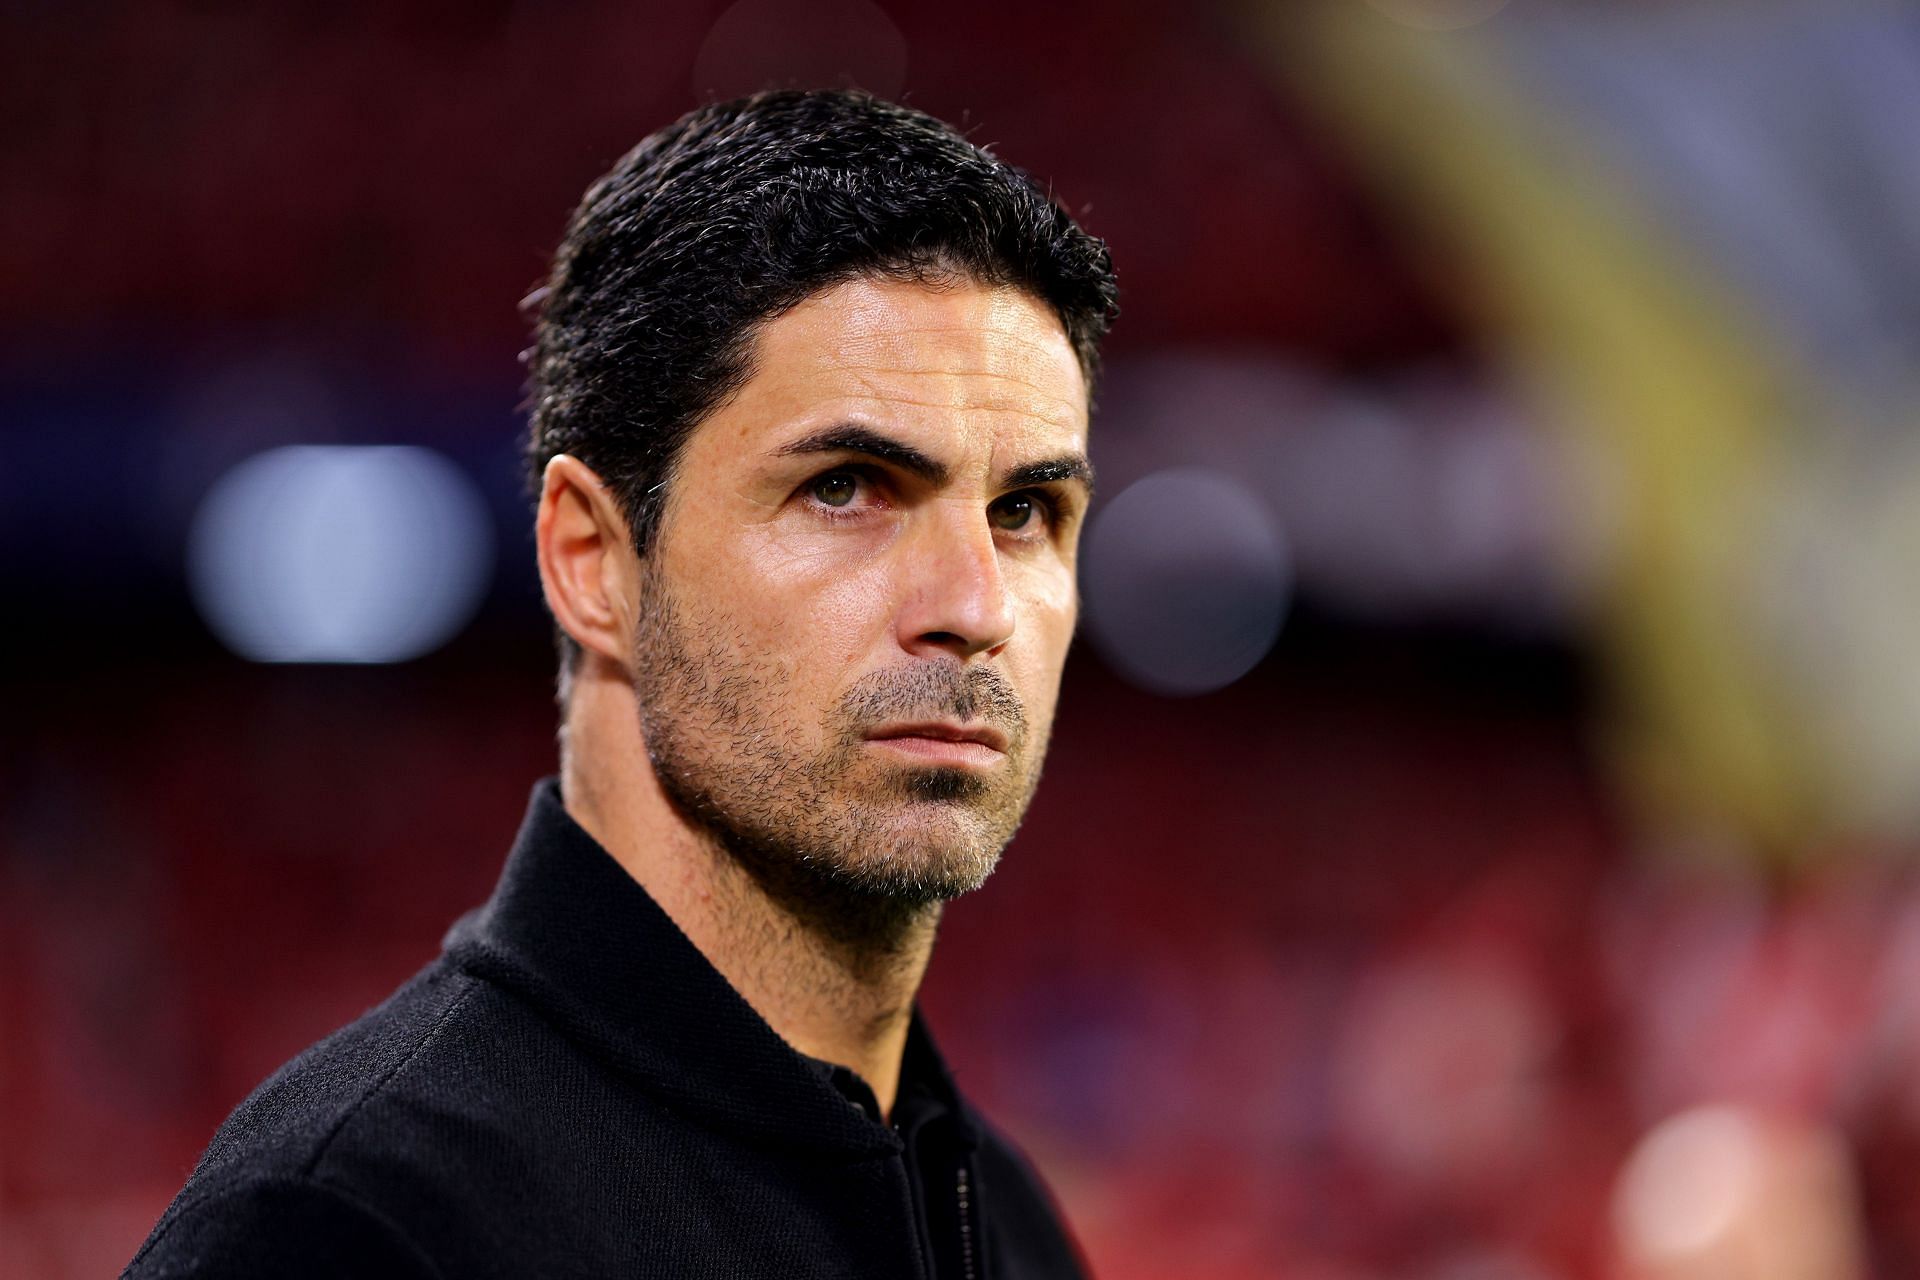 Mikel Arteta could bring the title to the Emirates.